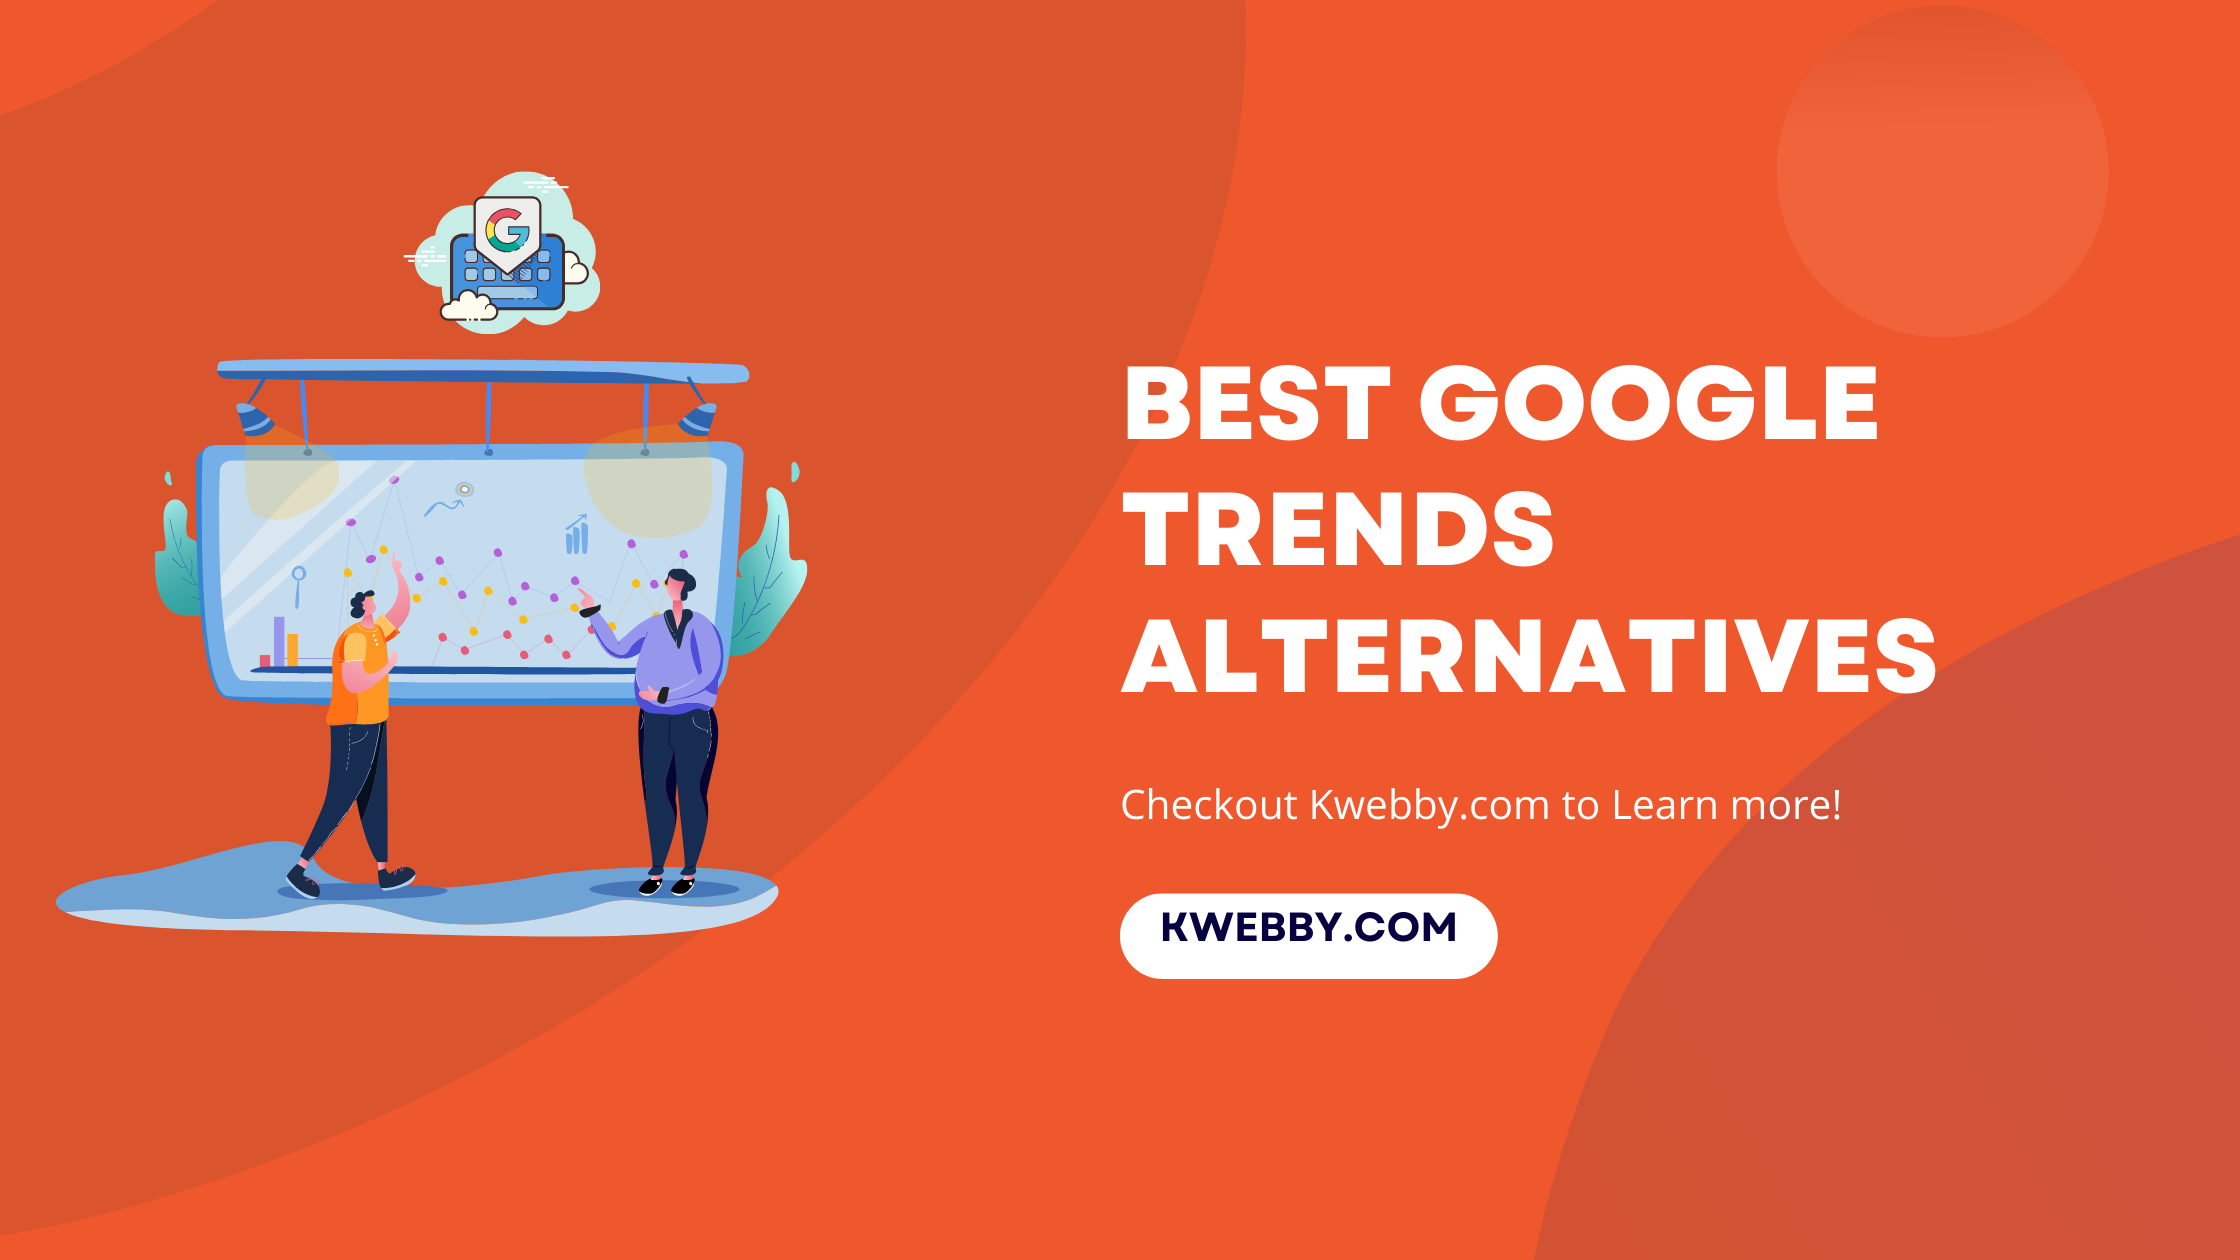 11 Best Google Trends Alternatives to Try (Mostly Free!)